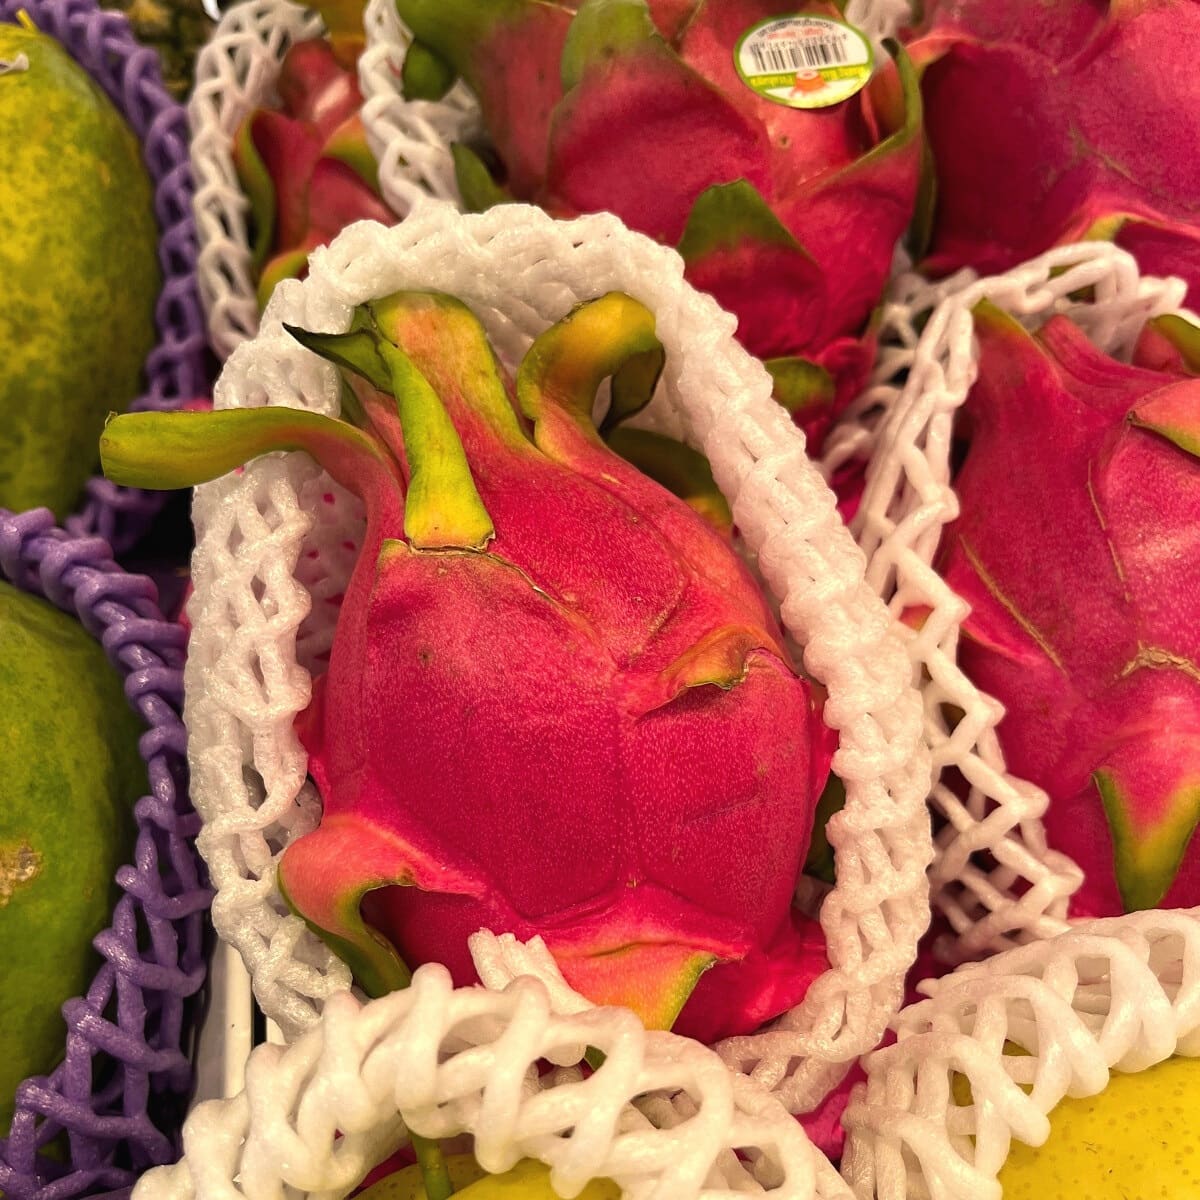 Dragon fruits in grocery store